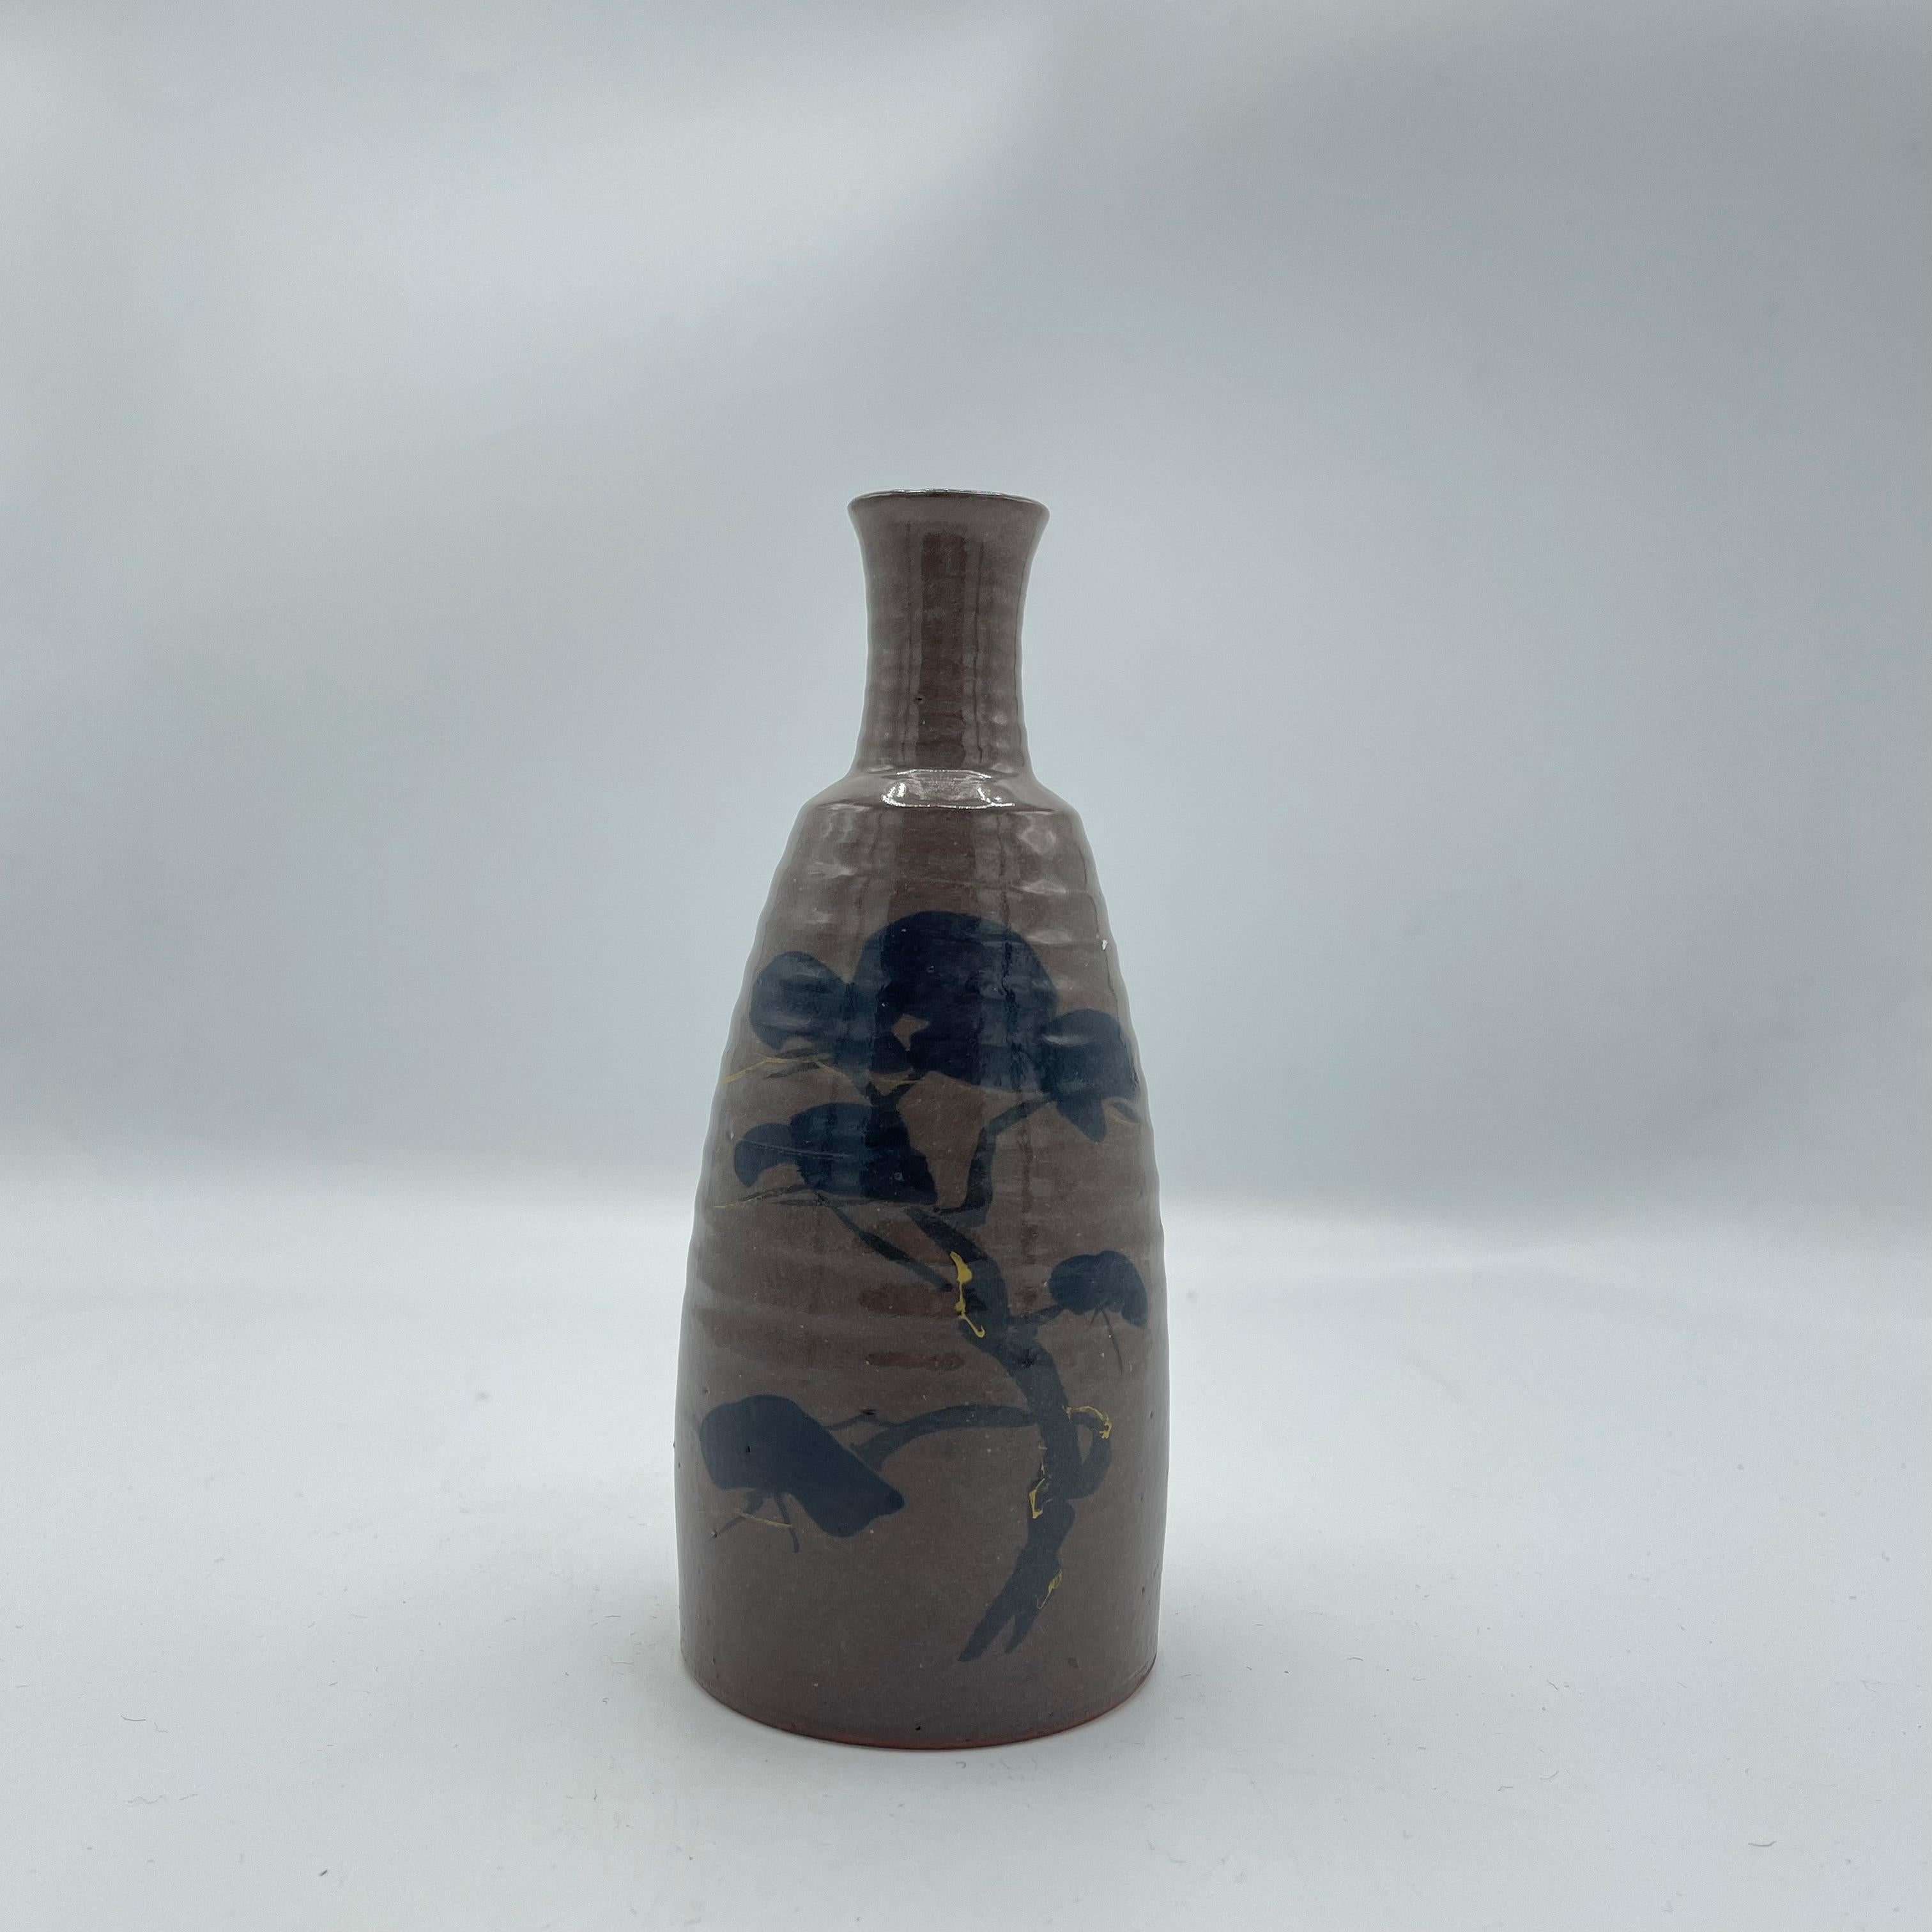 This is a sake bottle which was made around 1980s in showa era.
It is made with porcelain and the design is hand painted.
This sake bottle can be used as a flower vase too. 

Dimensions:
5,5 x 5,5 x H13 cm